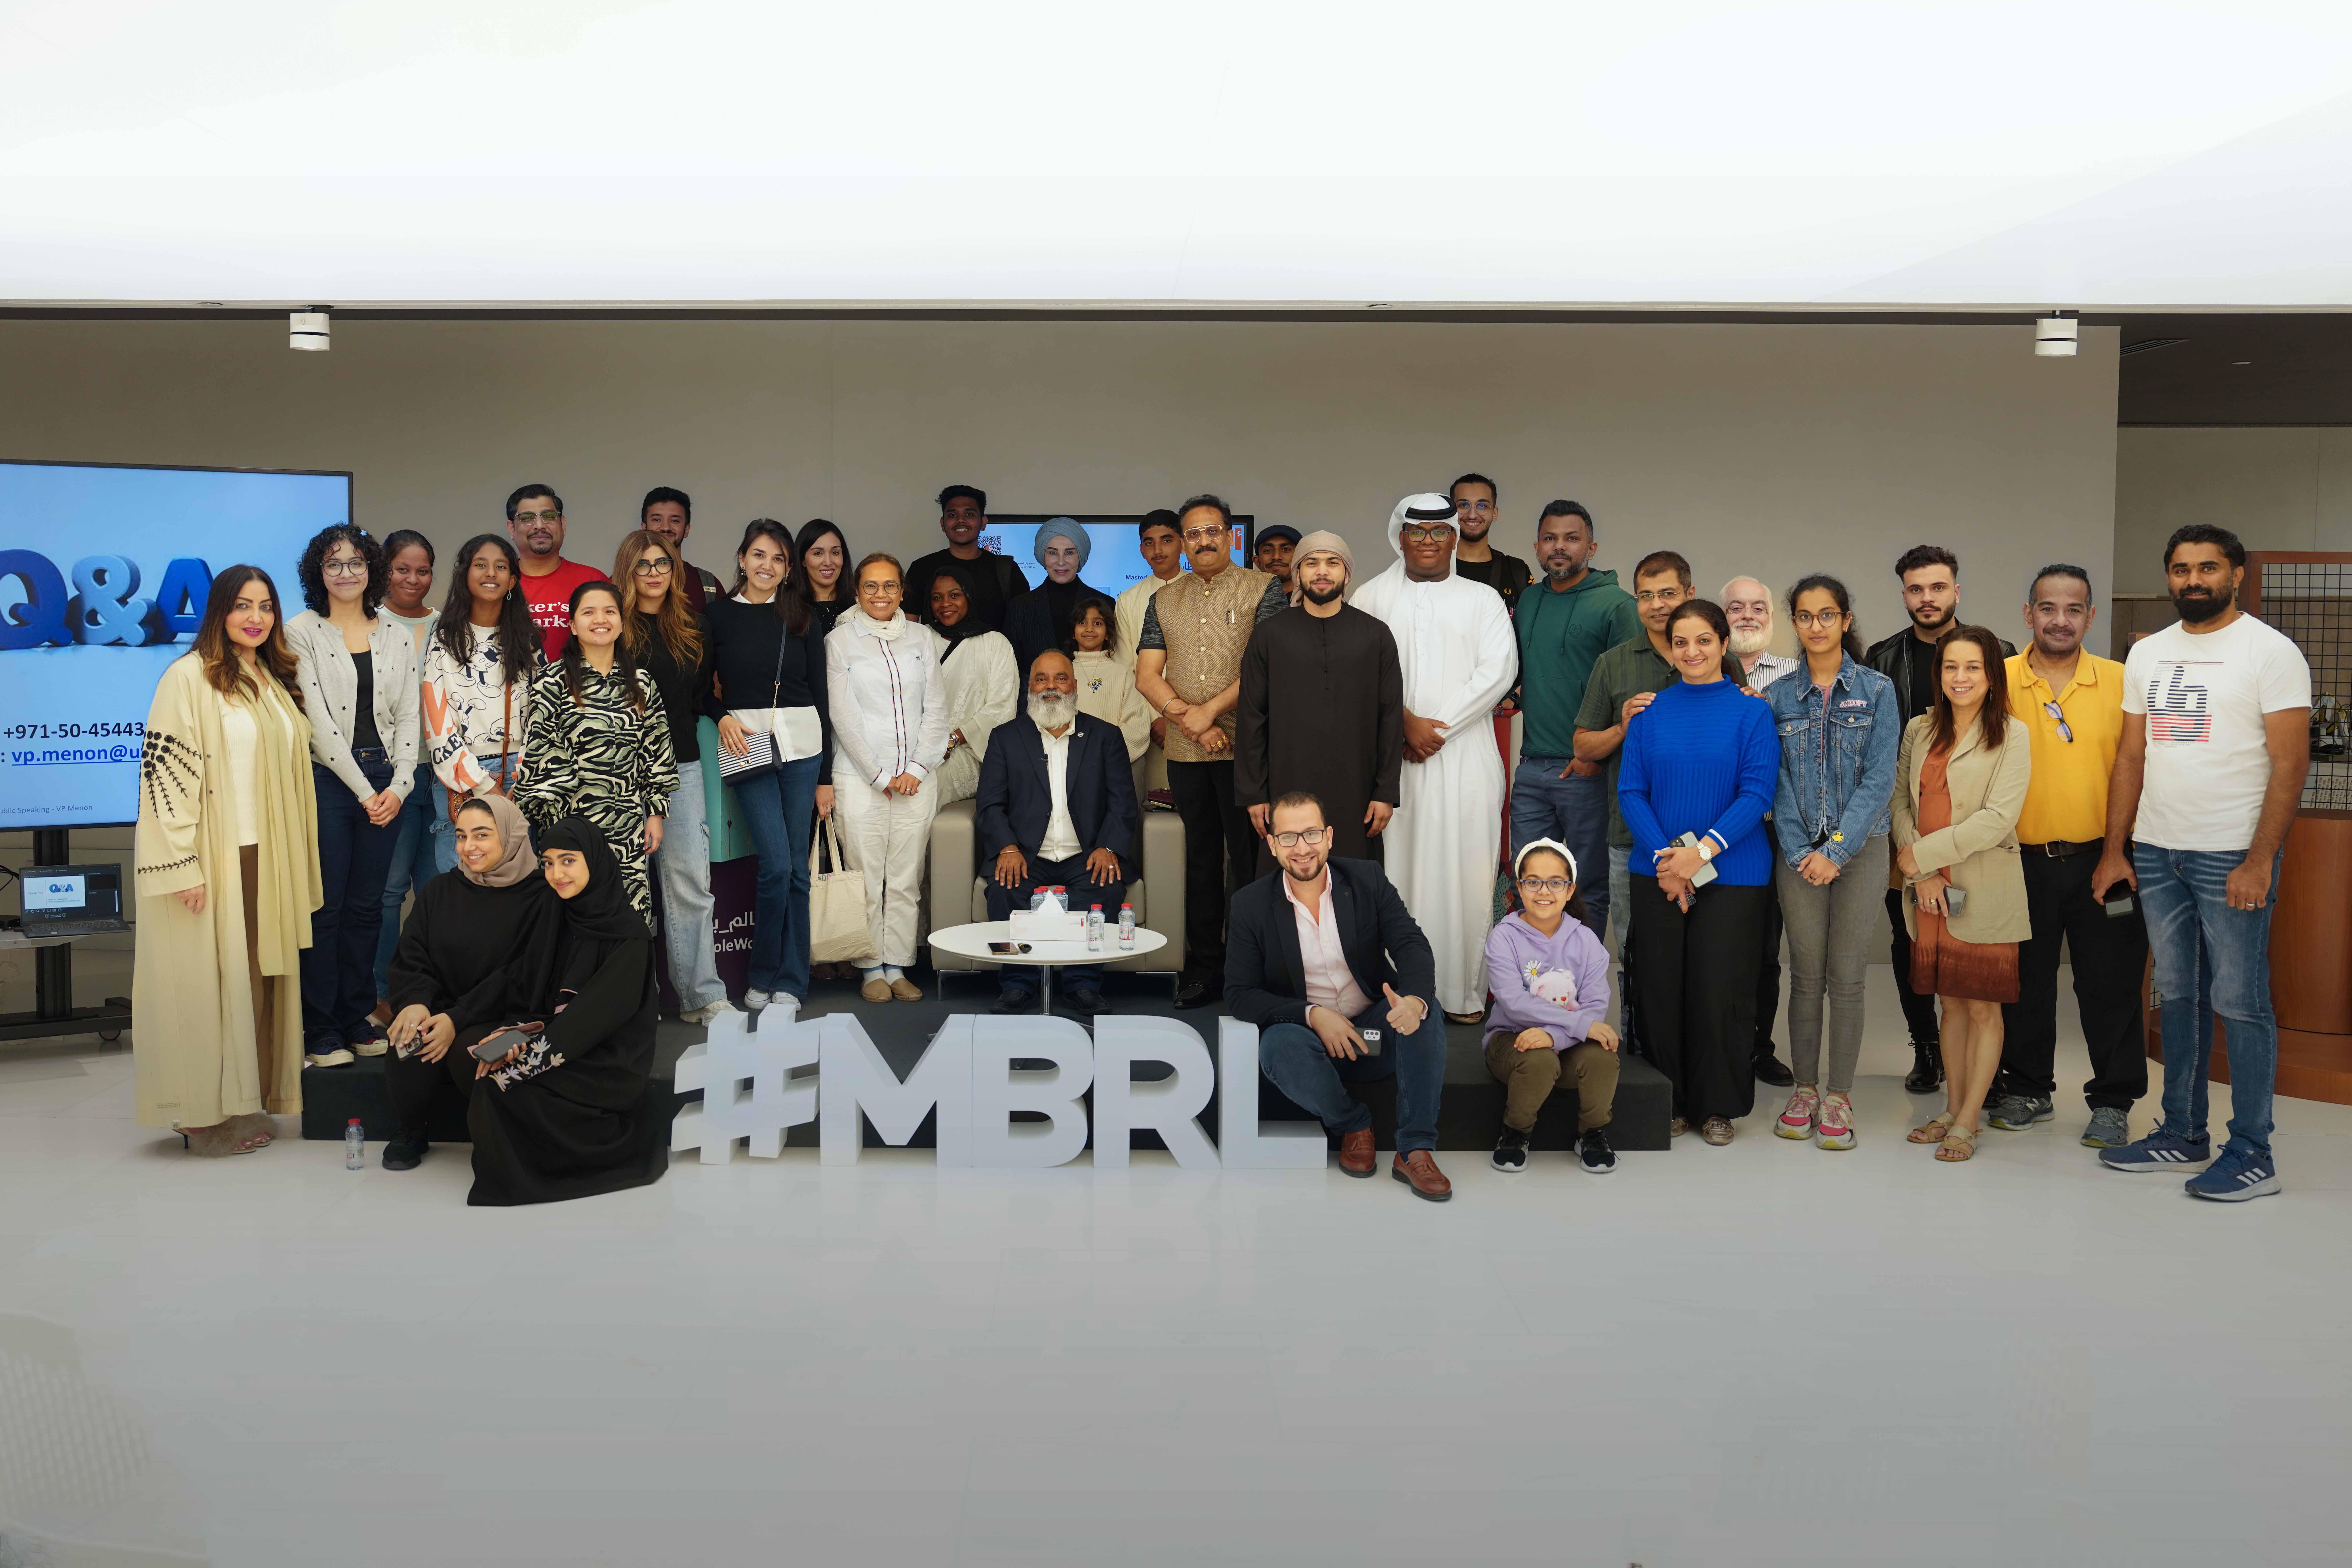 Wide Participation in the “Public Speaking Workshop” at Mohammed Bin Rashid Library